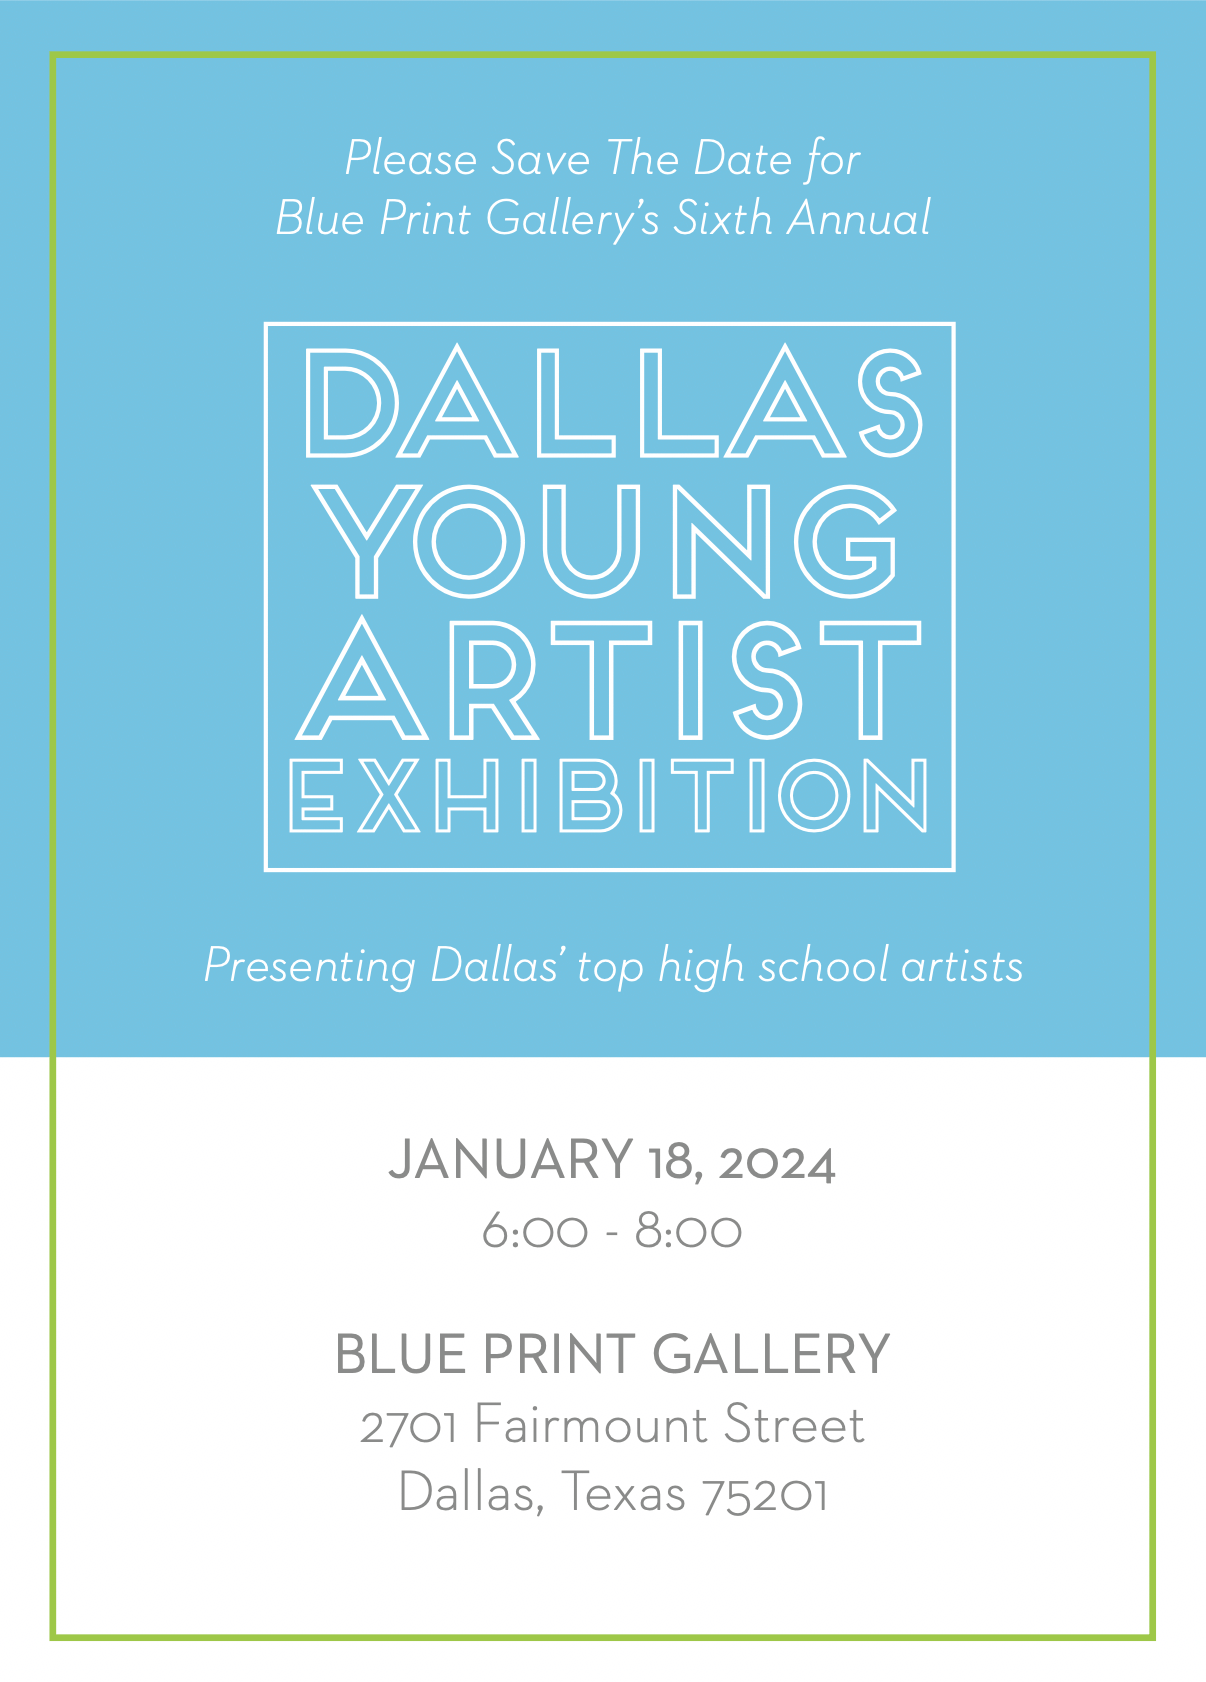 save the date for blue print gallery's sixth annual dallas young artist exhibition, presenting dallas' top high school artists. it will take place on january 18th, 2024 from 6-8 pm. it will happen at the blue print gallery in dallas, located at 2701 fairmount street, dallas, texas 75201